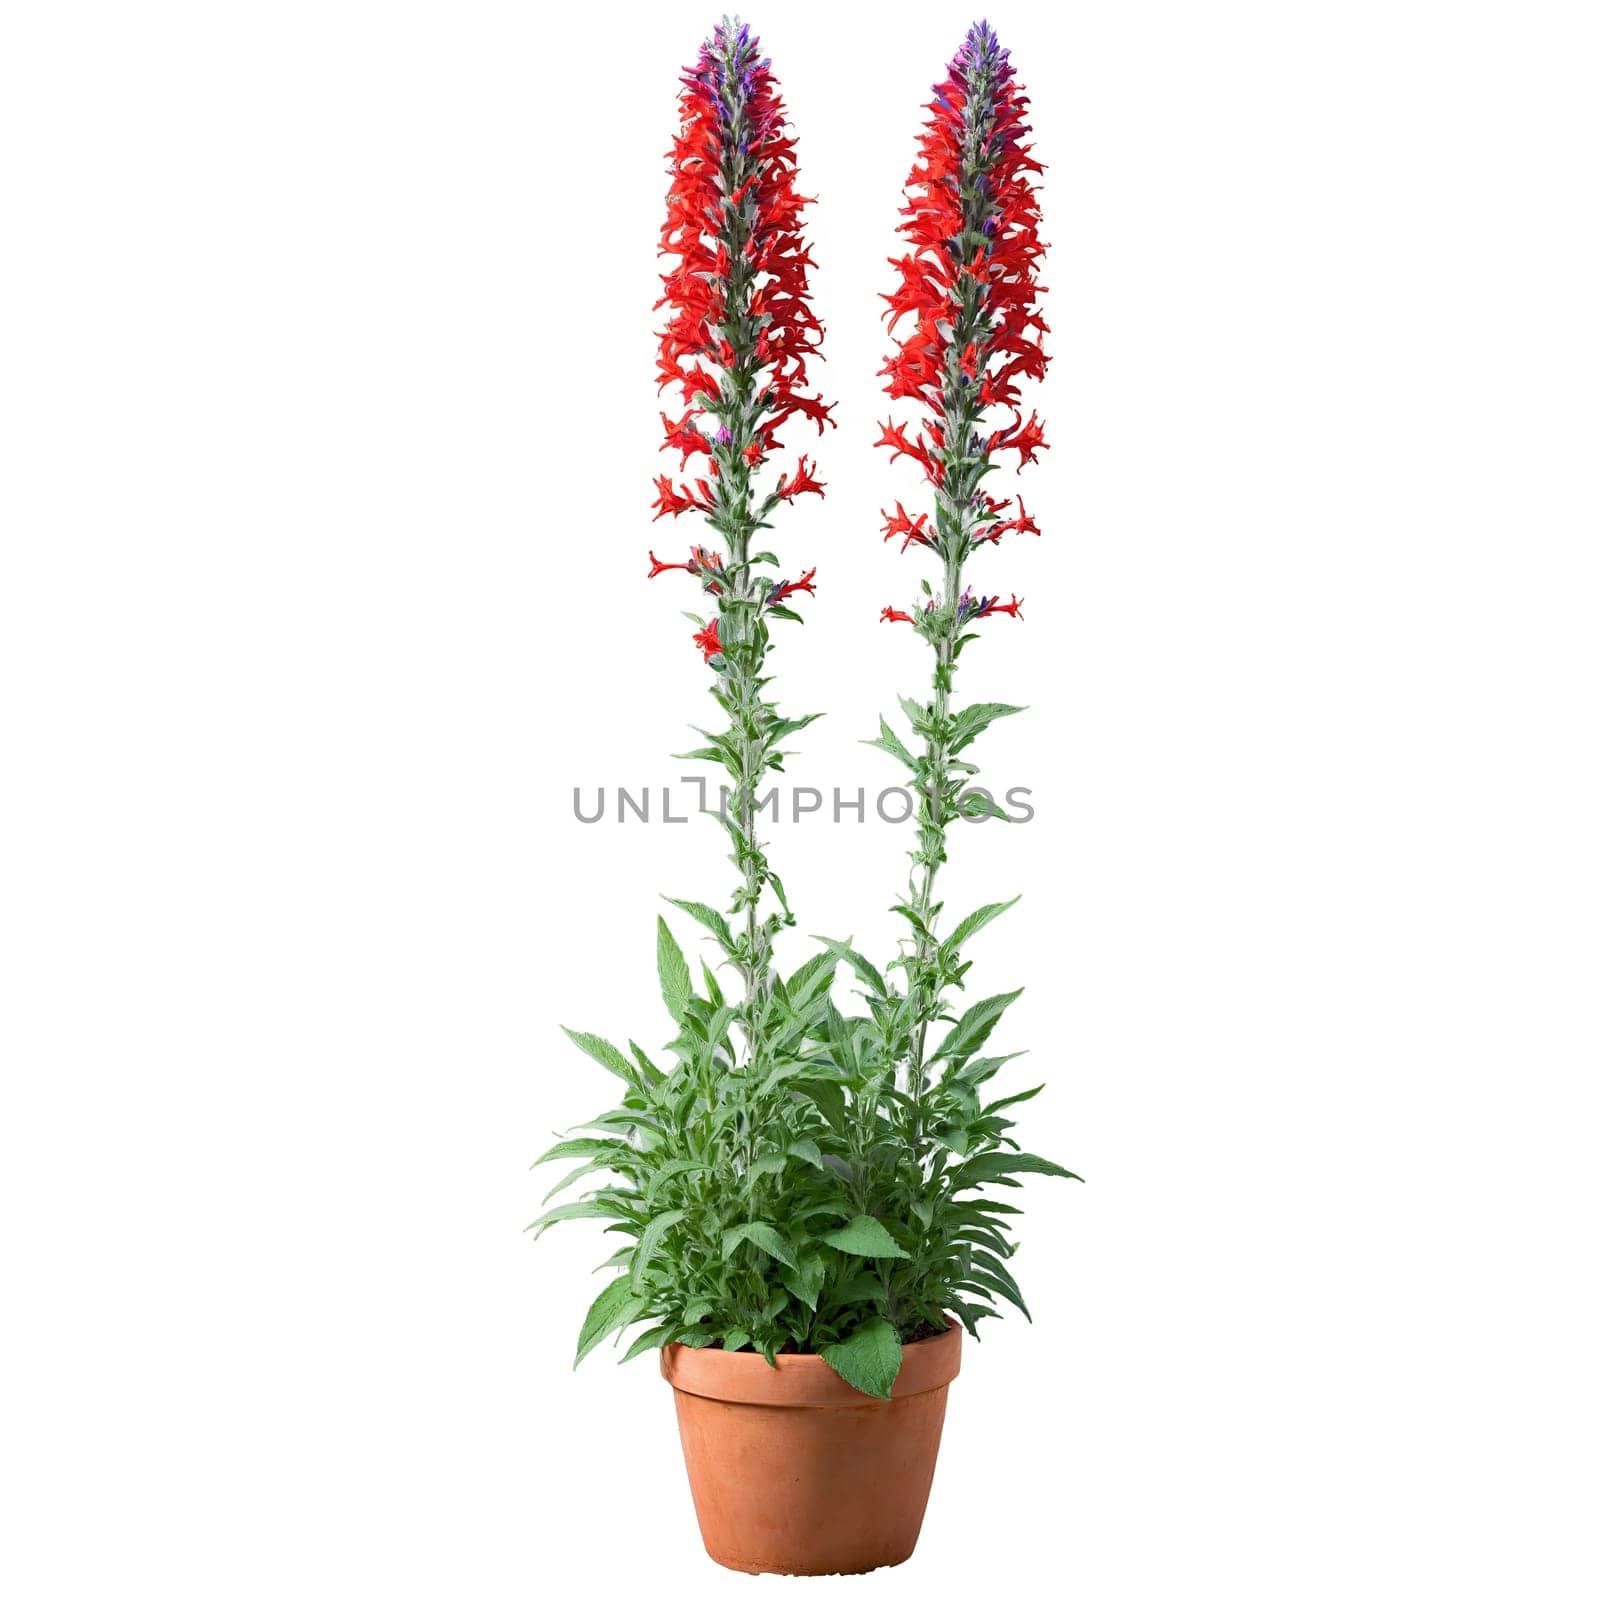 Salvia vibrant red tubular flowers on tall spikes in a terracotta pot with lush green by panophotograph